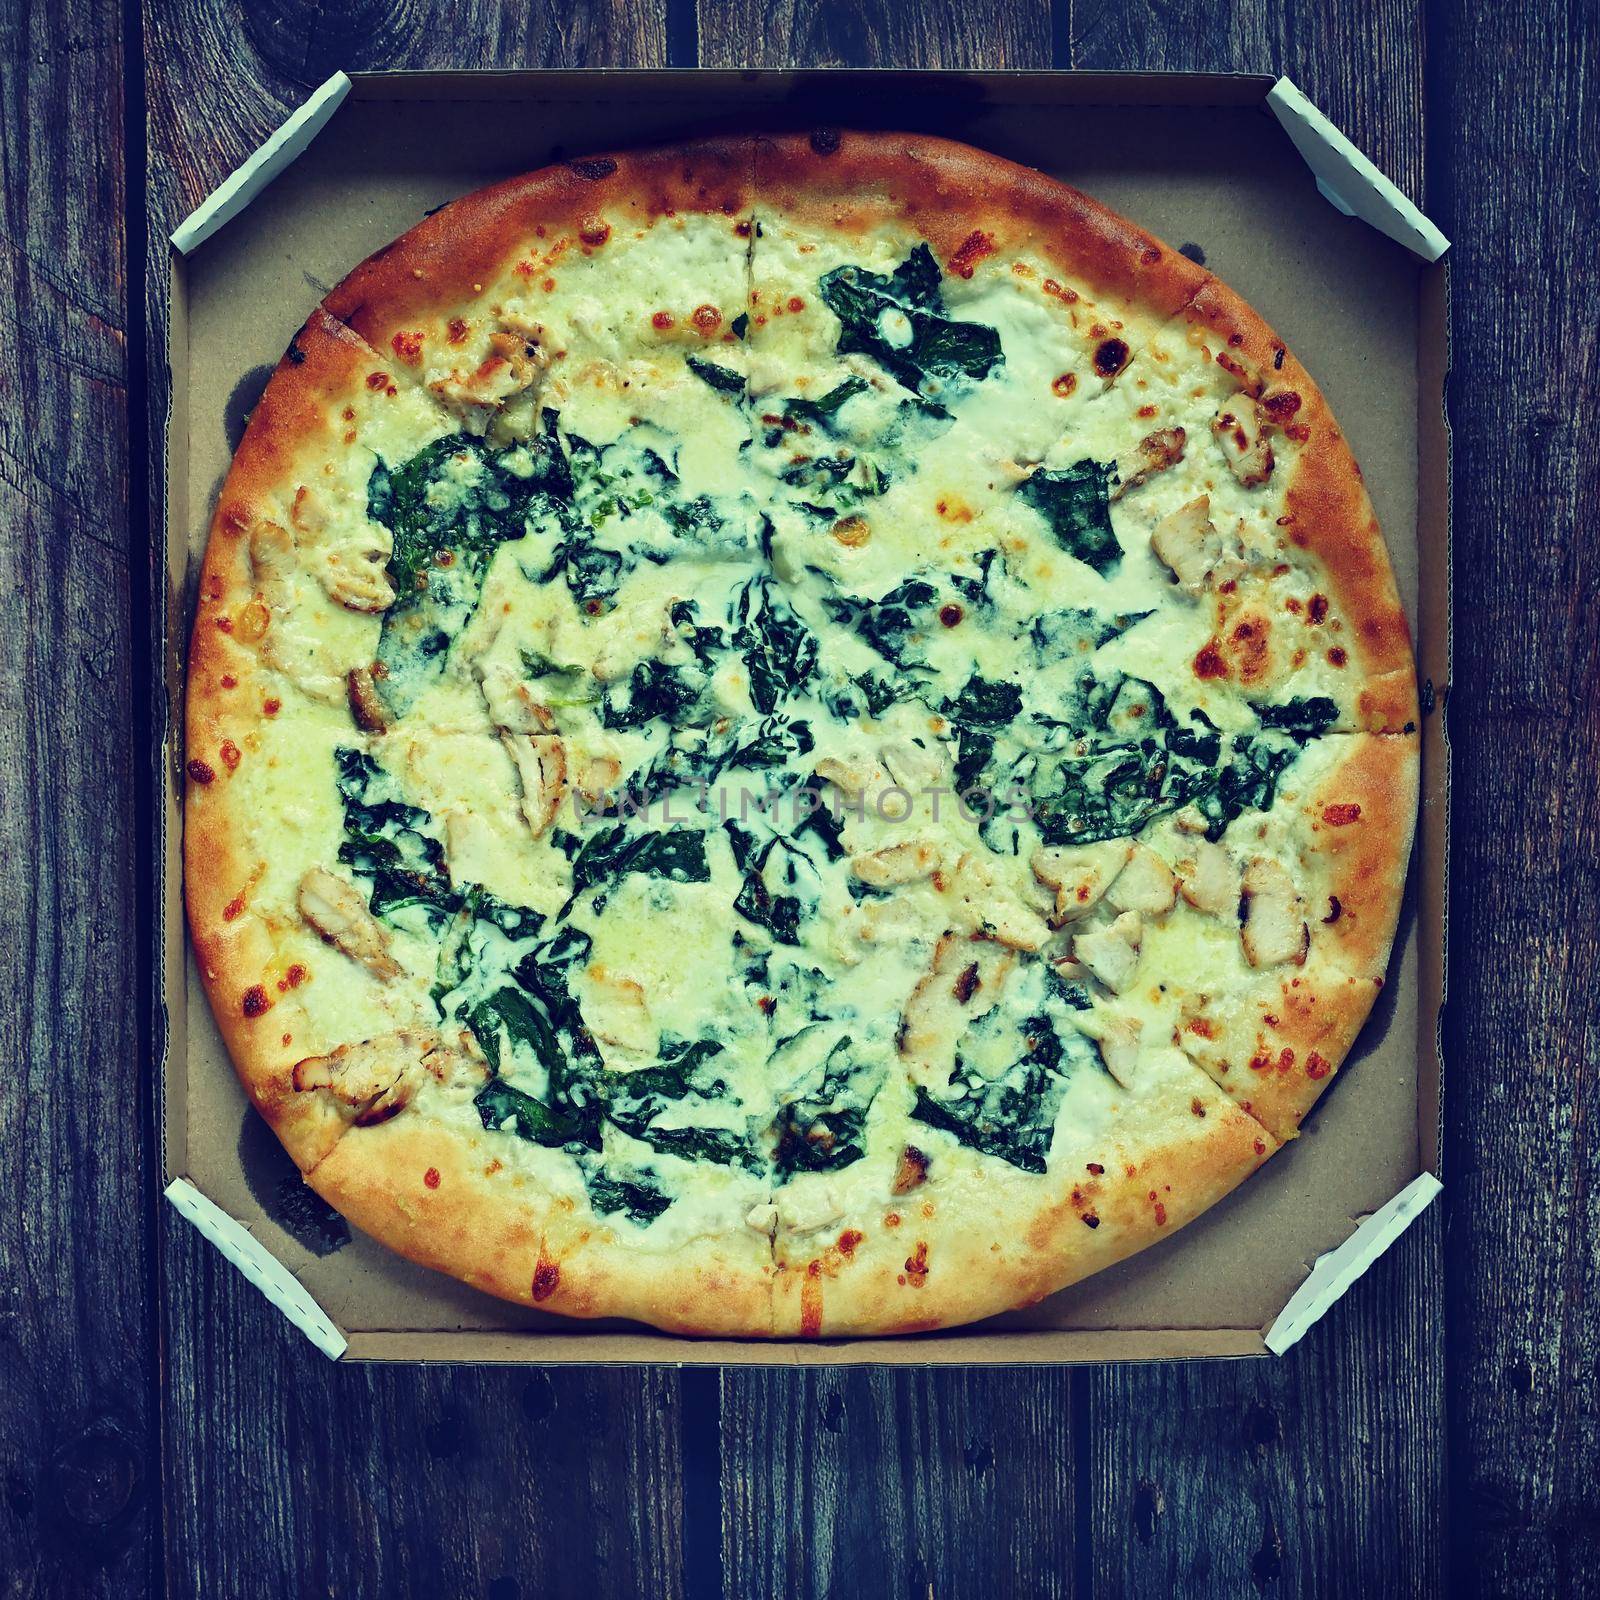 Delicious fresh pizza served on wooden table. Pizza with cream and spinach ready for delivery in a box.